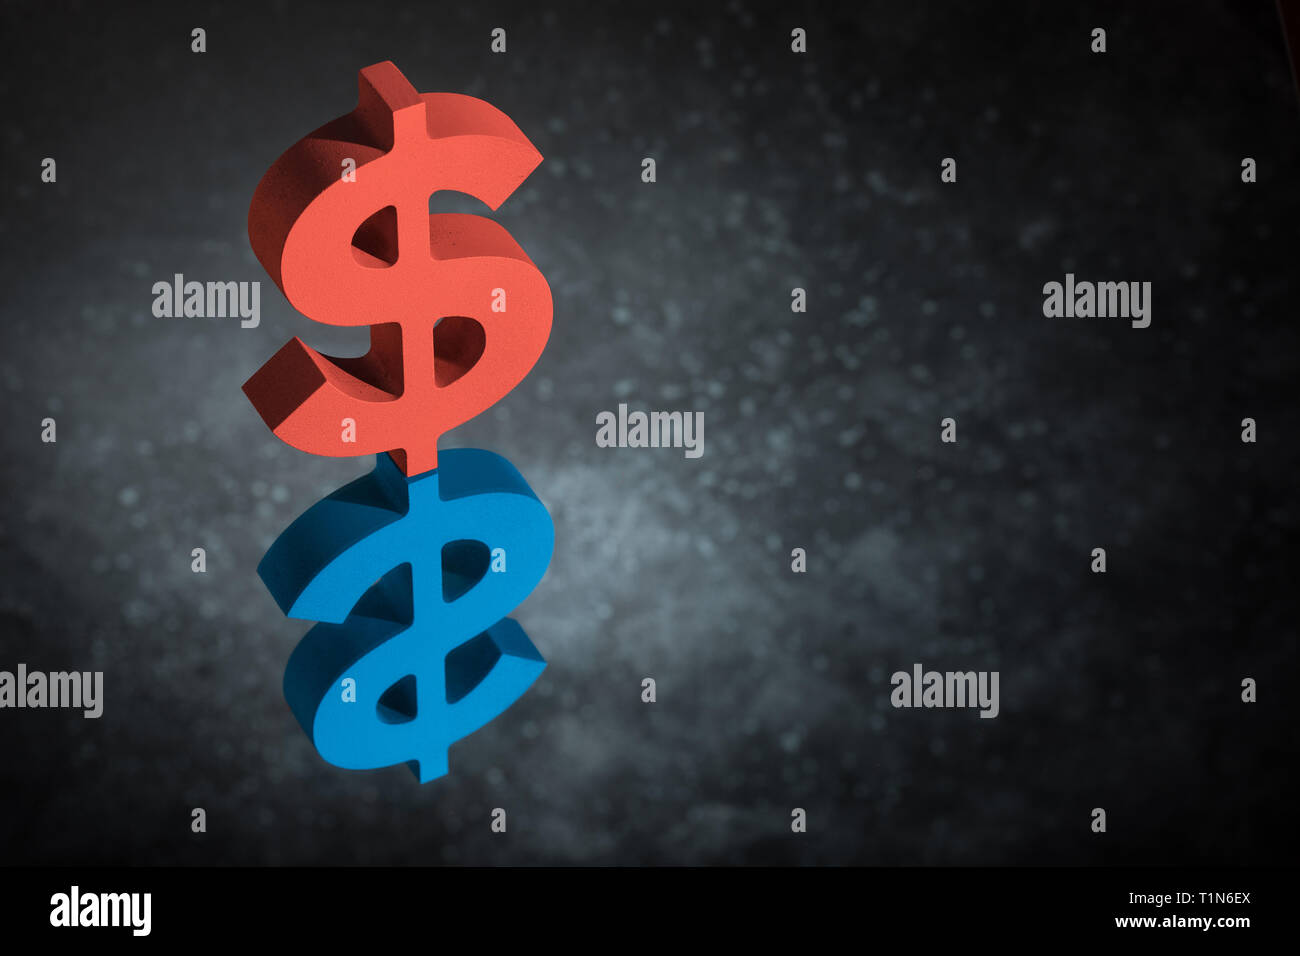 Red and Blue American Currency Symbol or Sign Dollar With Mirror Reflection on Dark Dusty Background Stock Photo